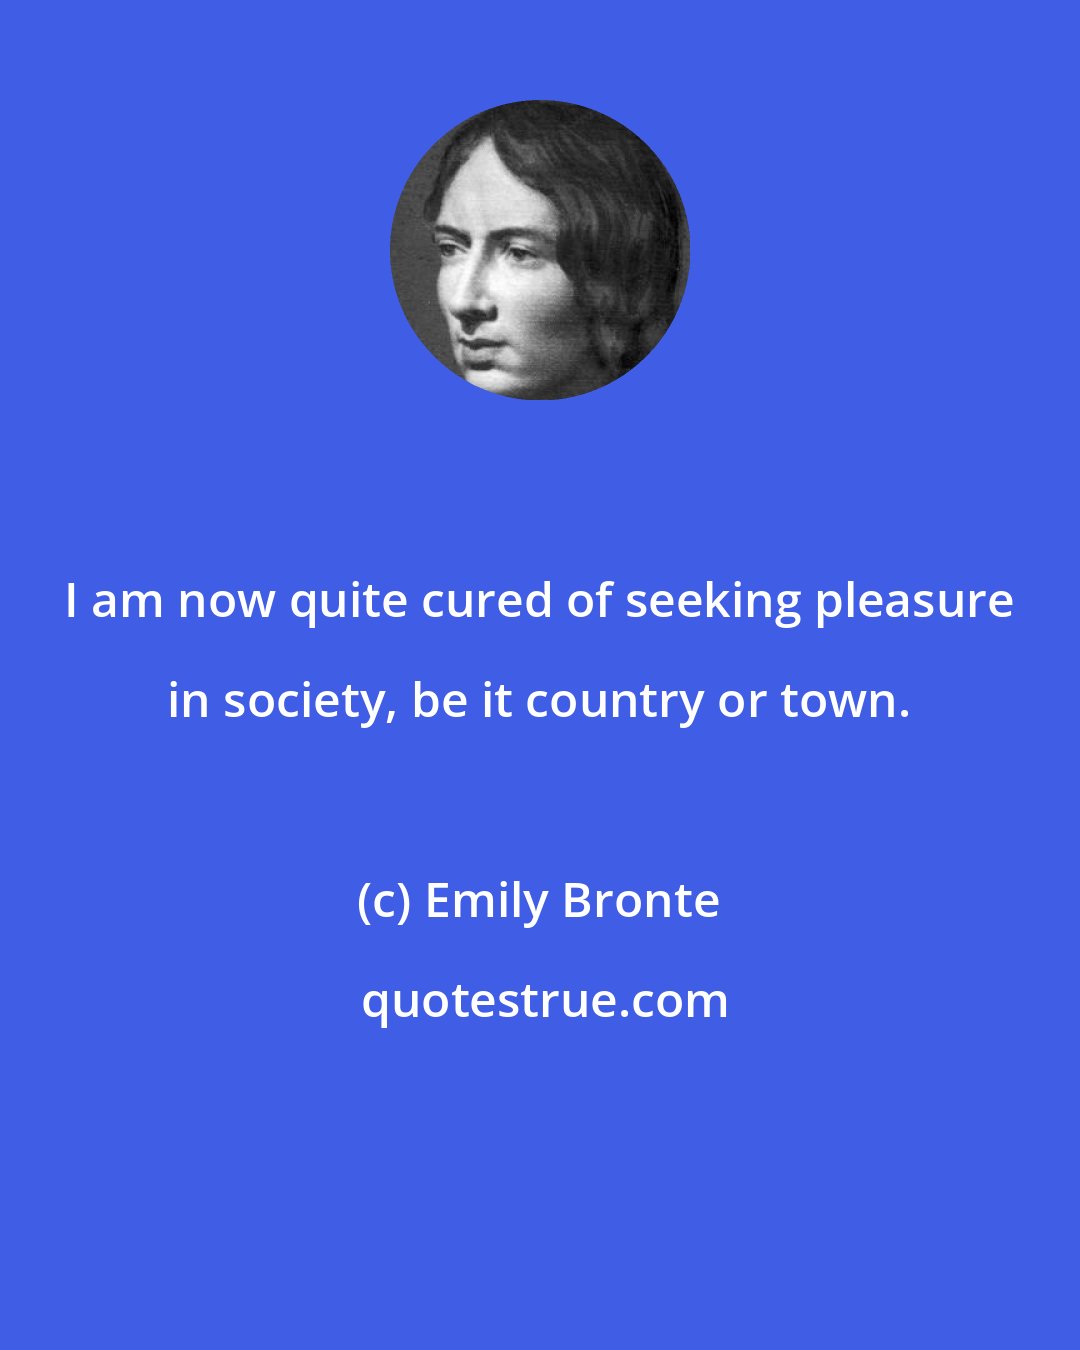 Emily Bronte: I am now quite cured of seeking pleasure in society, be it country or town.